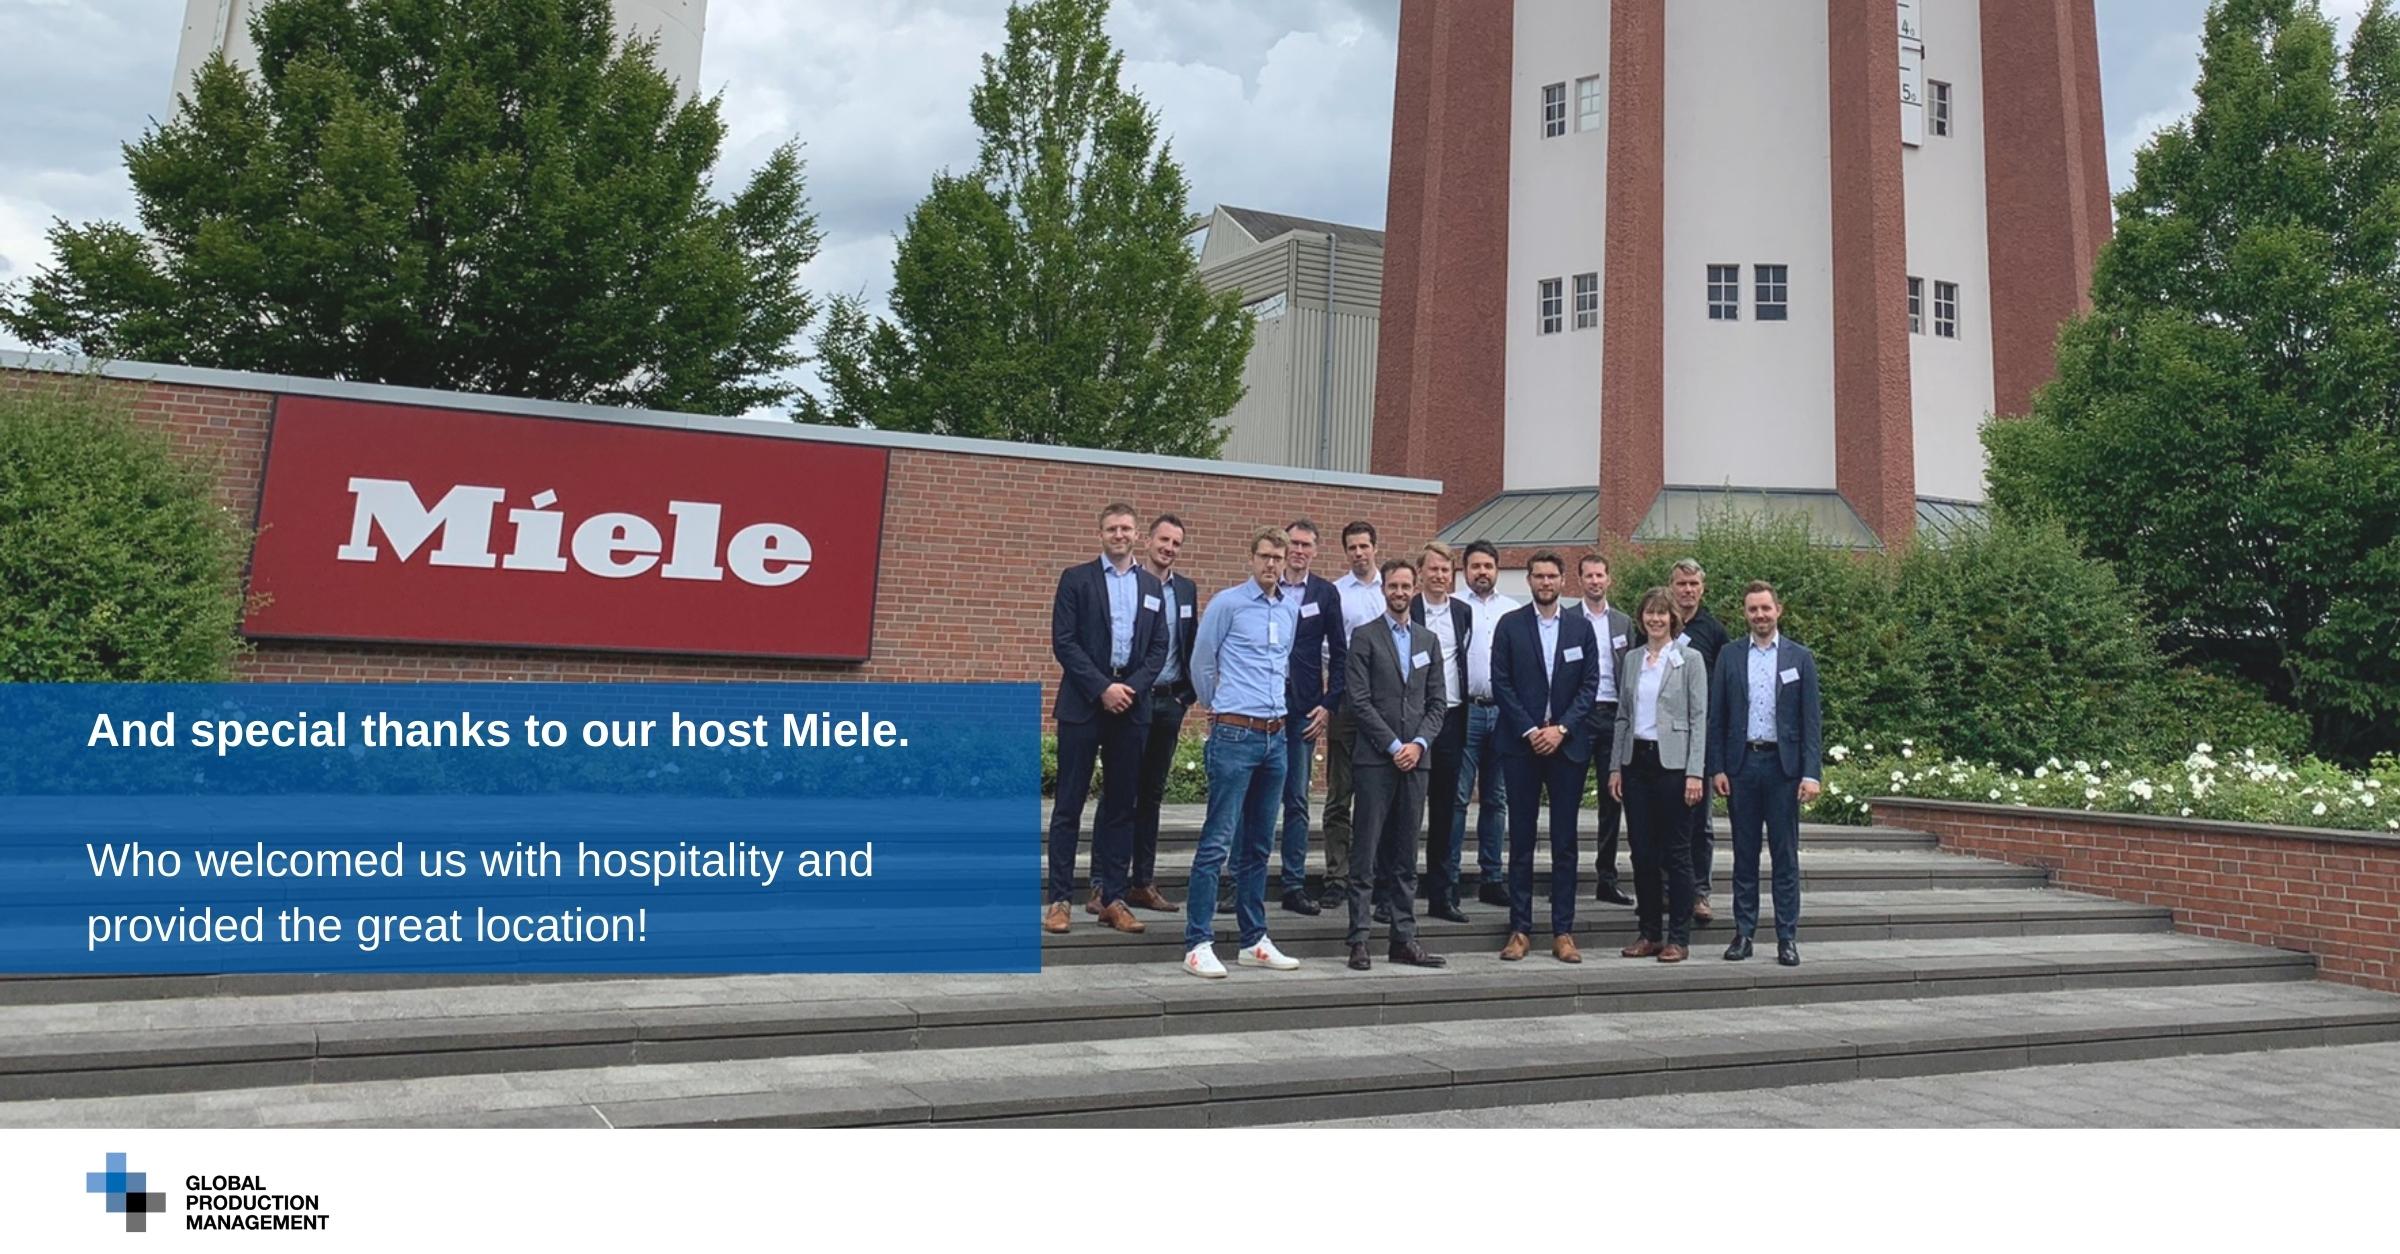 And-special-thanks-to-our-host-Miele.-Who-welcomed-us-with-hospitality-and-provided-the-great-location Meeting of the Global Production Community  